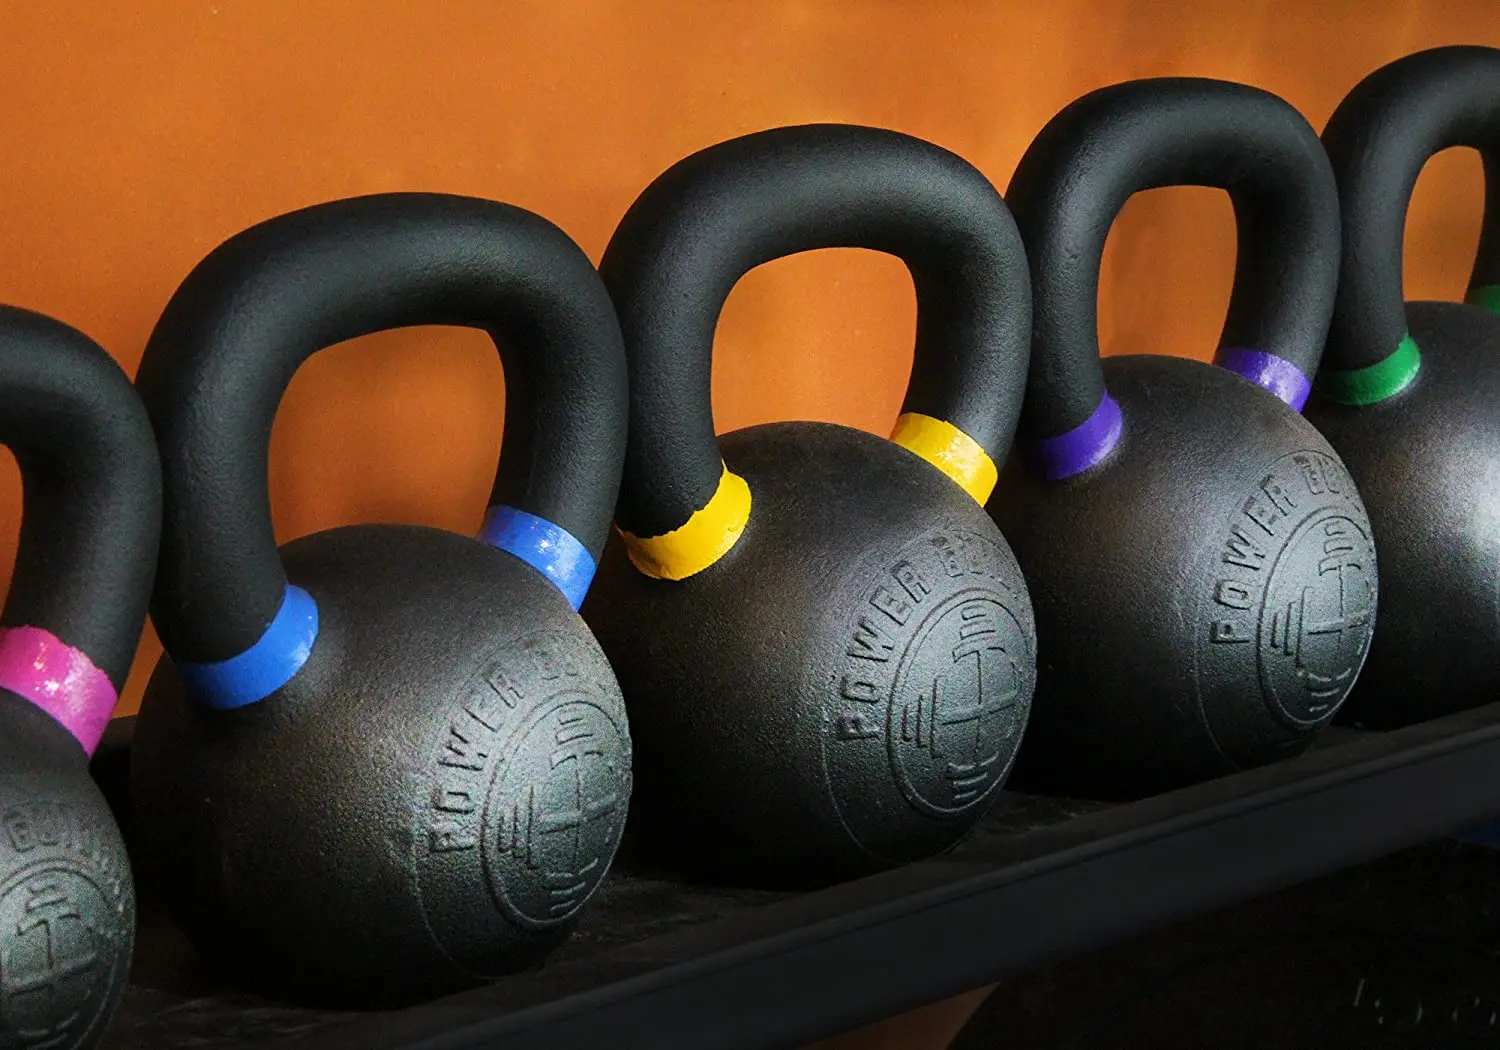 
Powder Competition Coated Cast Iron Kettlebell 